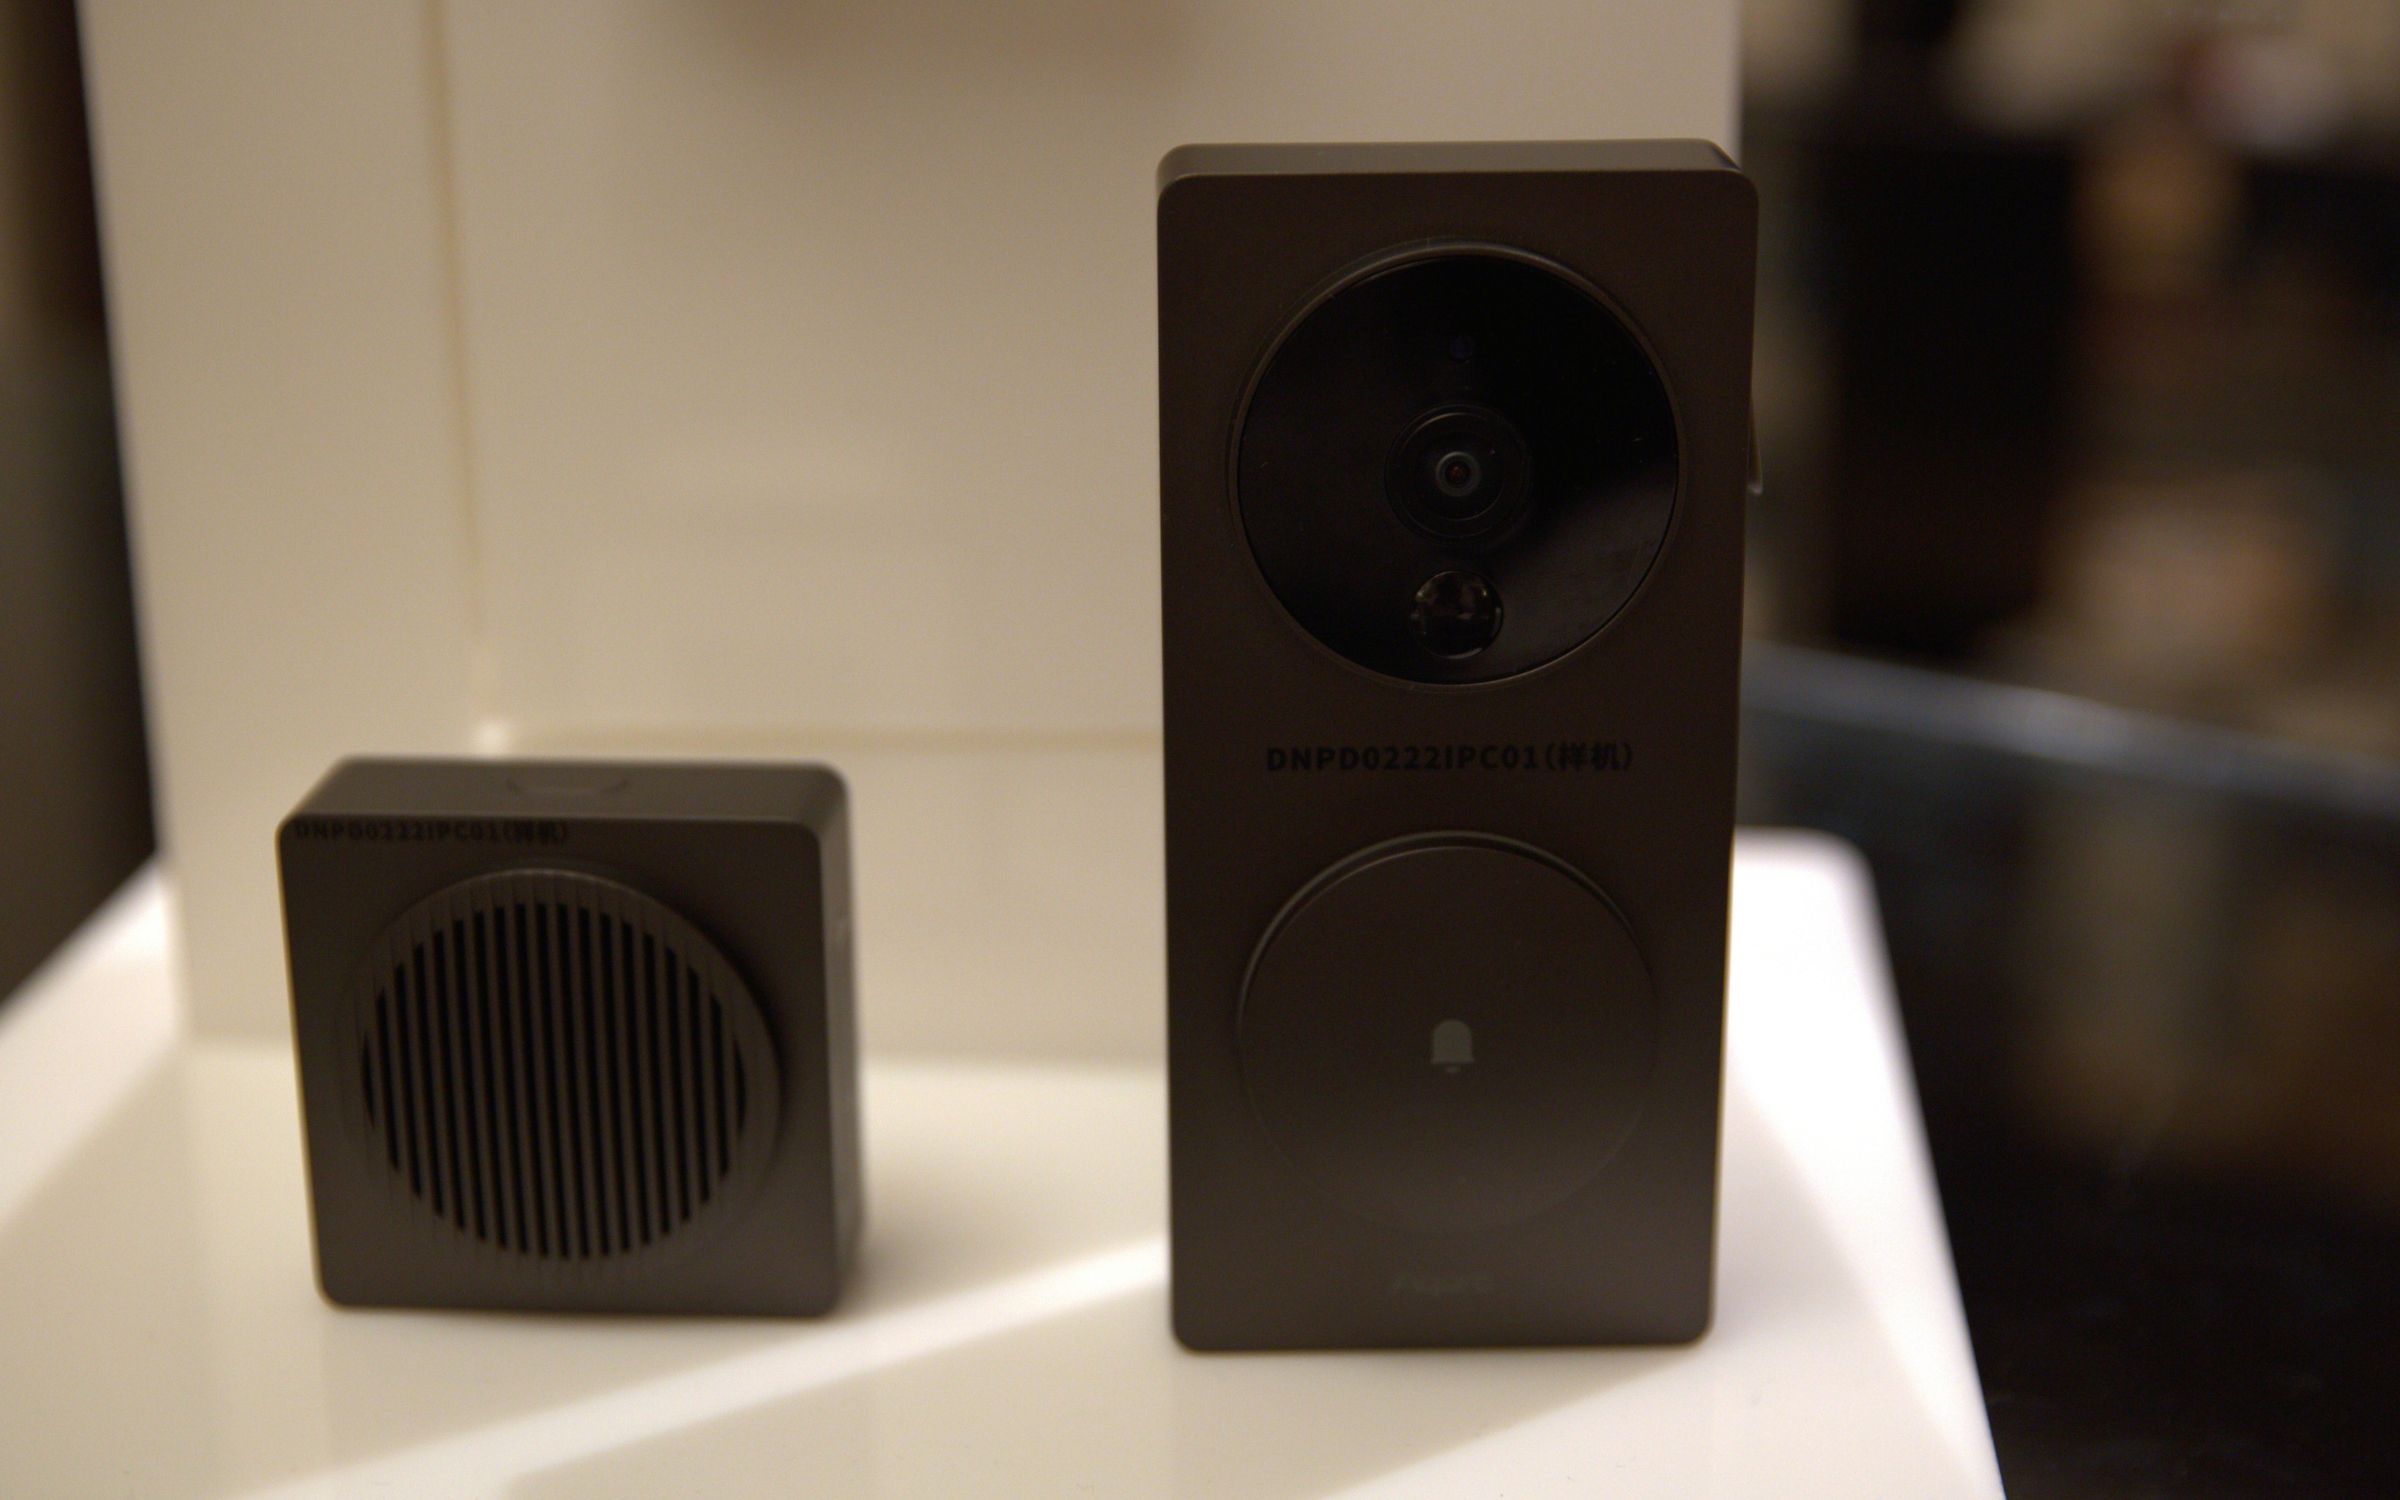 The Aqara Video Doorbell G4, with the chime speaker on the left and the main video doorbell on the right. they are placed on a white table at CES 2023.